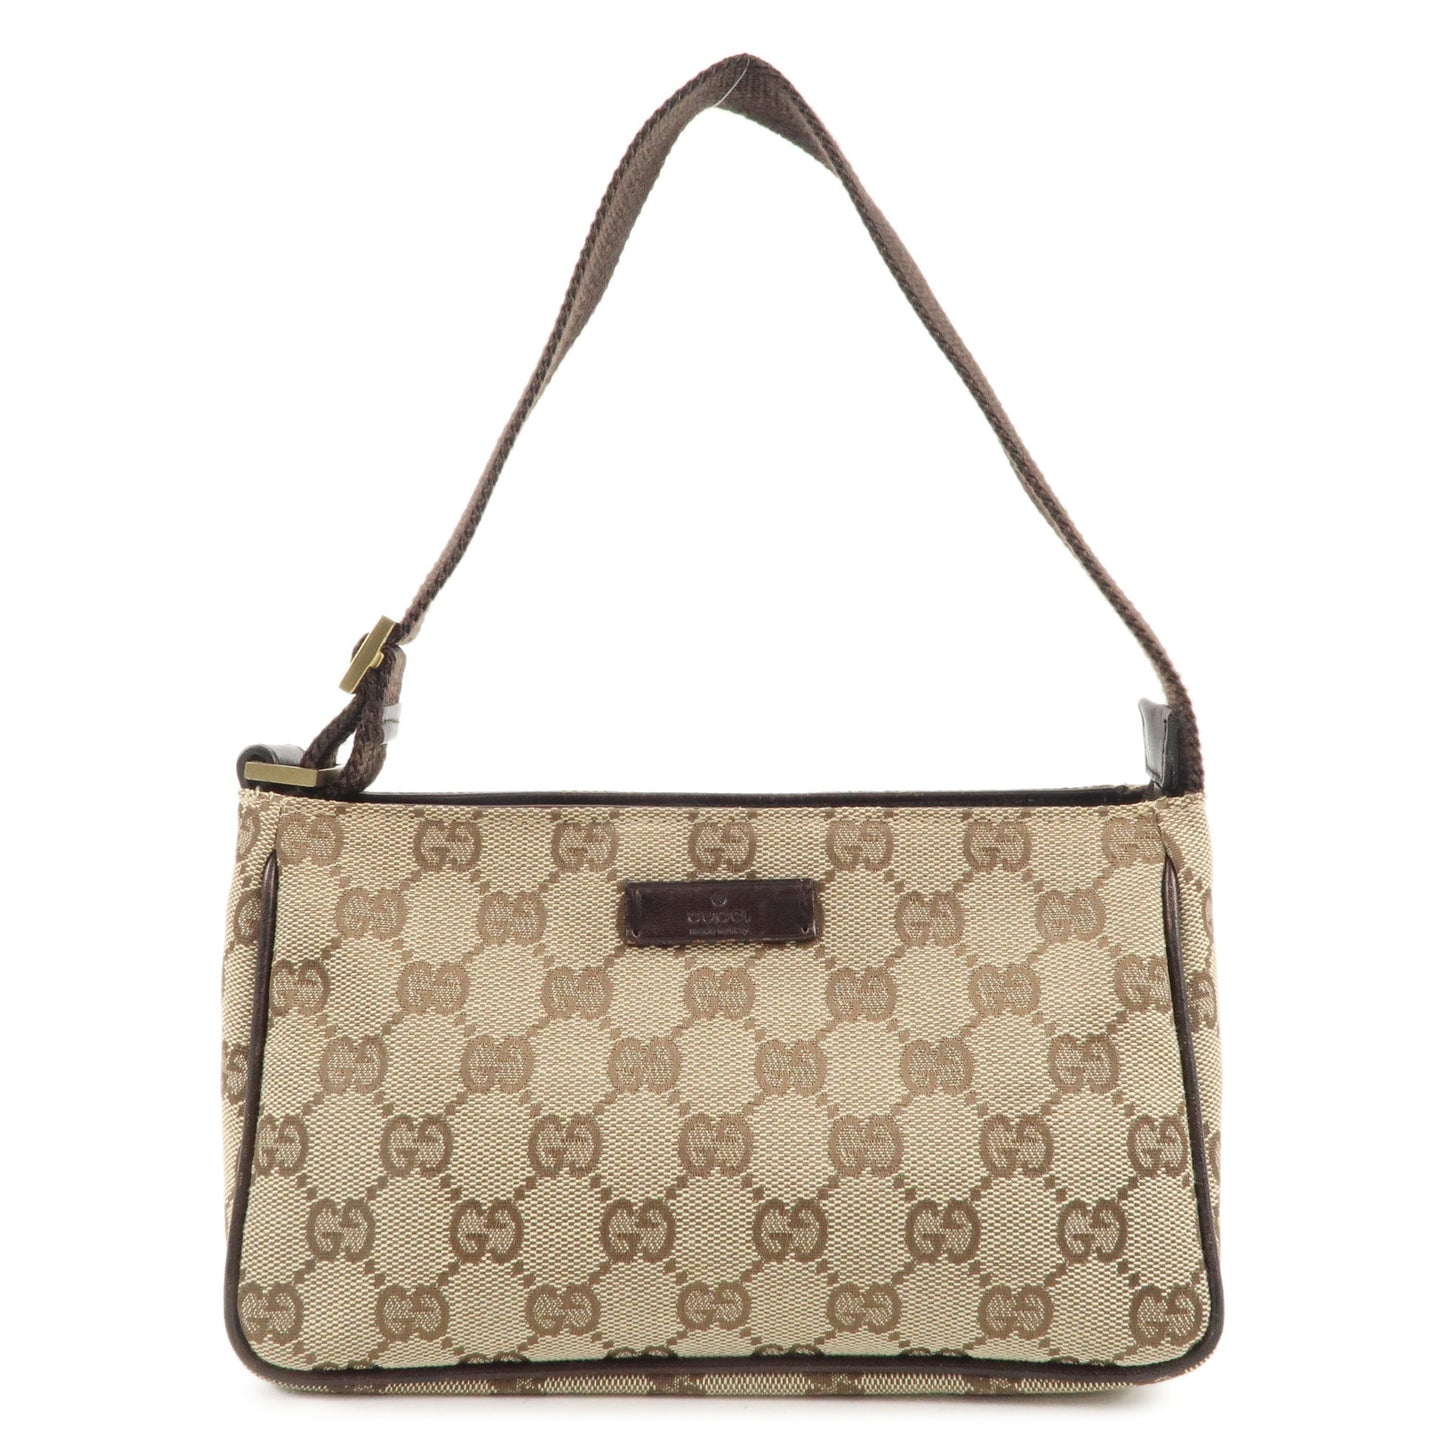 GUCCI GG Canvas Leather Hand Bag Beige Brown 106644